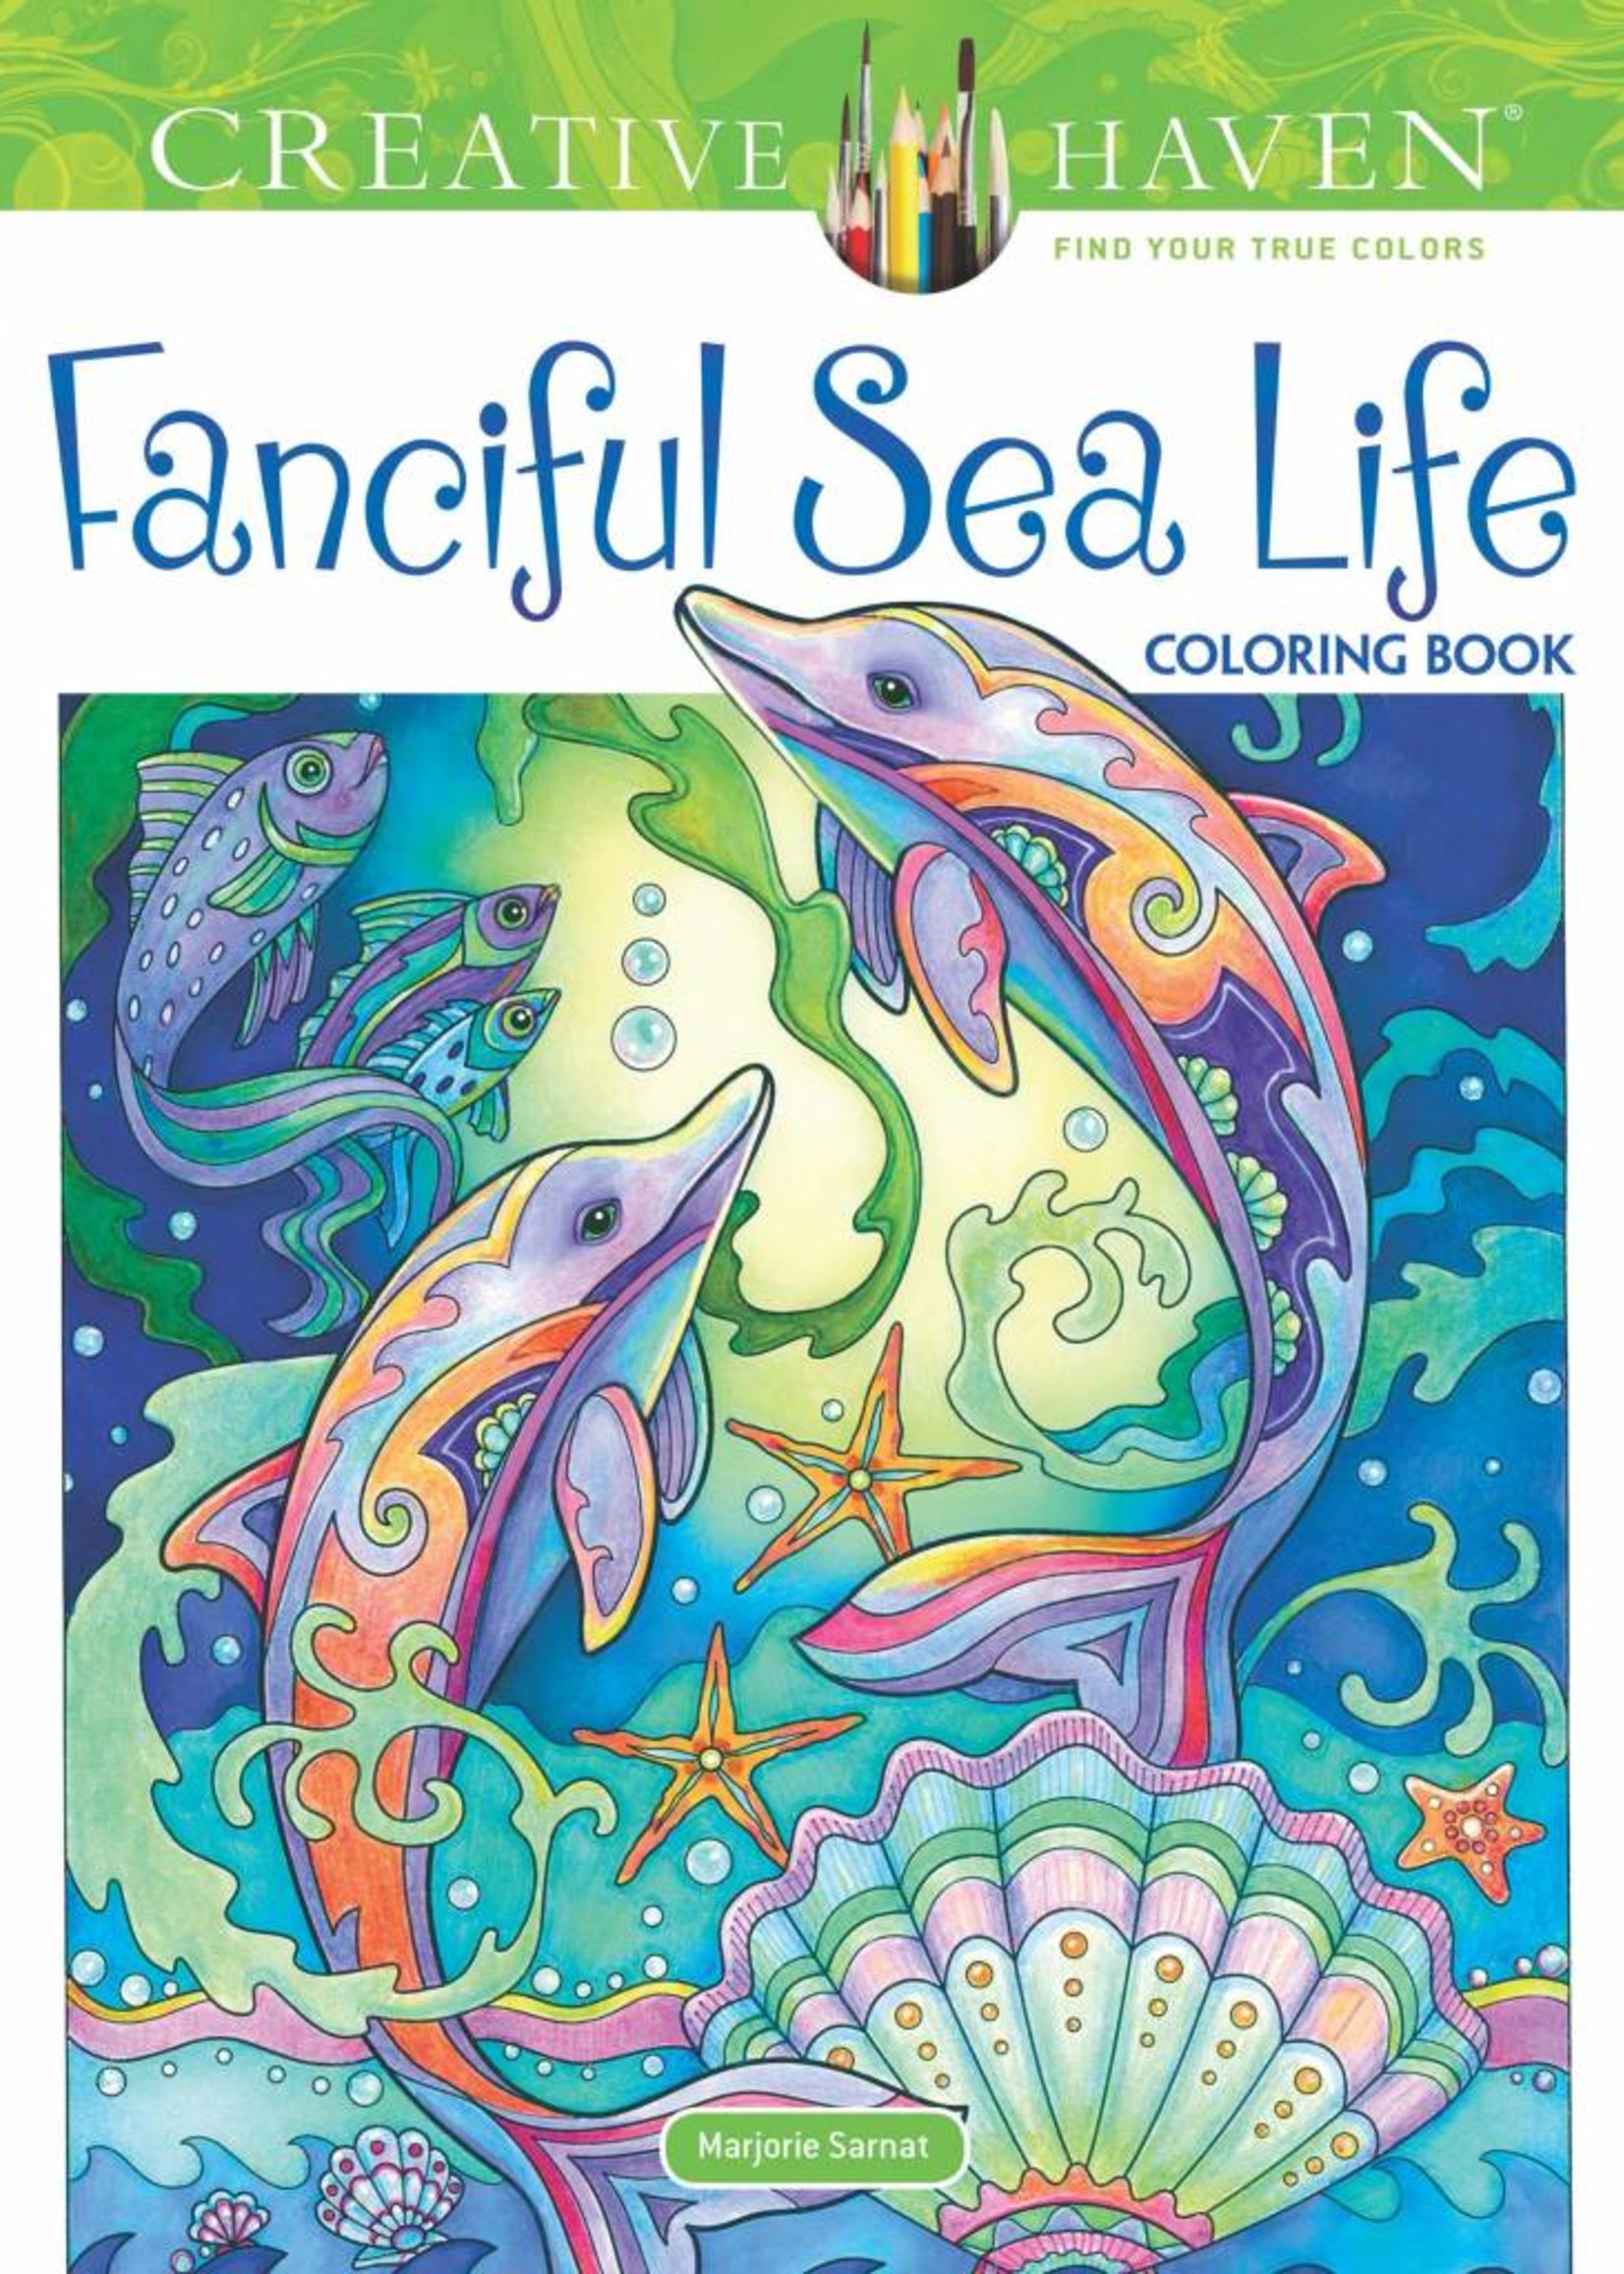 Fanciful Sea Life Adult Coloring Book